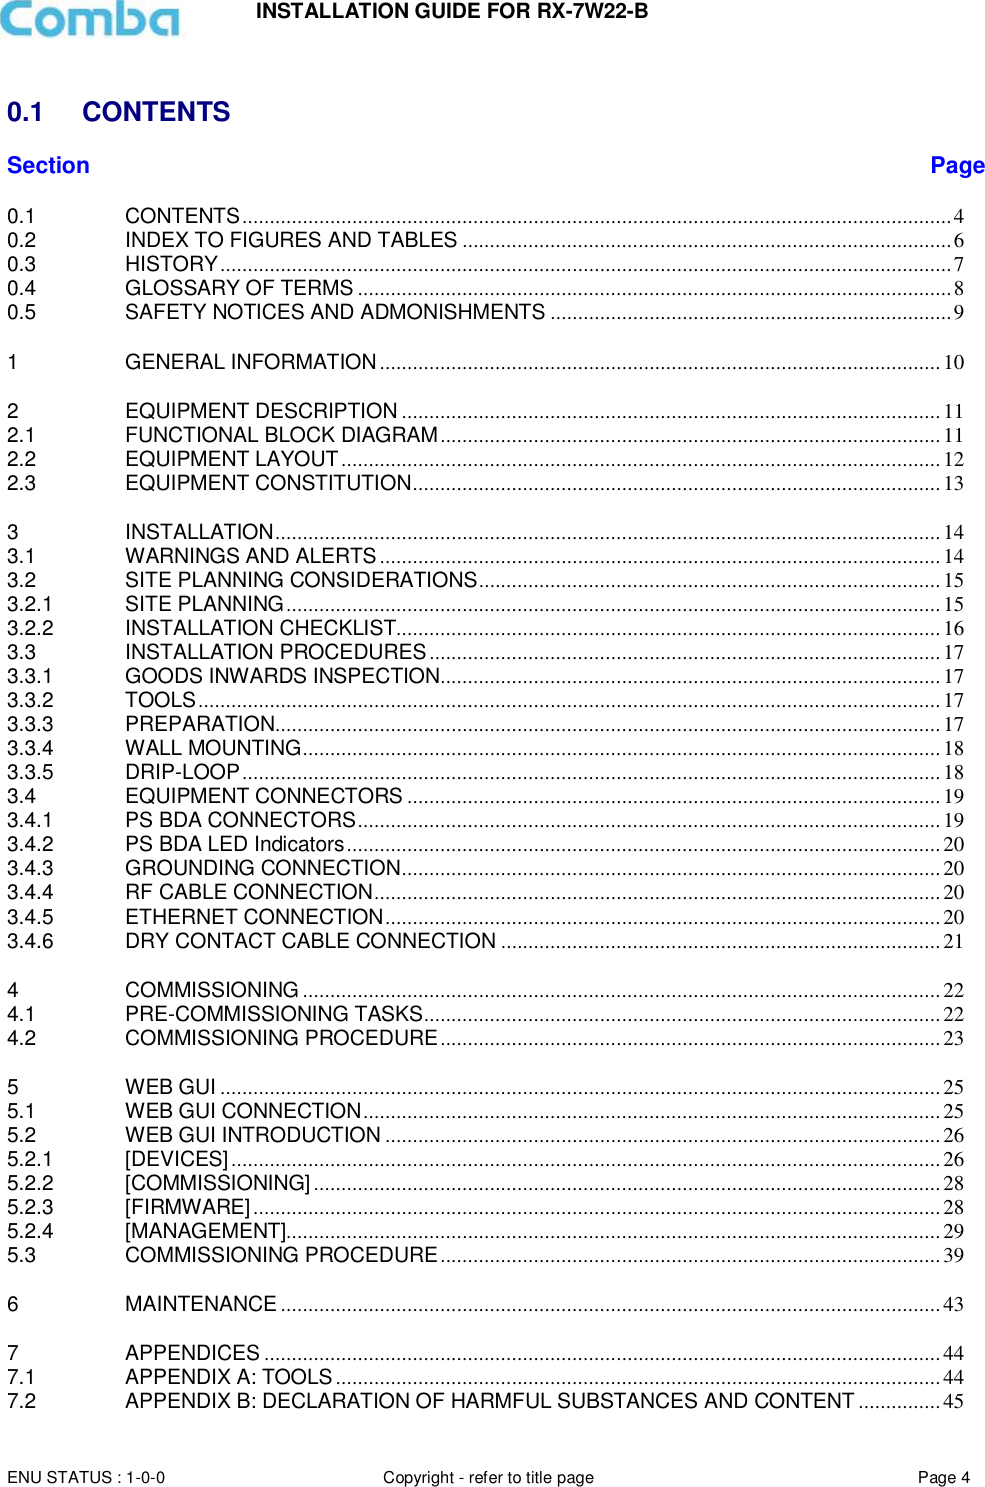 INSTALLATION GUIDE FOR RX-7W22-B  ENU STATUS : 1-0-0 Copyright - refer to title page Page 4      0.1  CONTENTS Section Page 0.1 CONTENTS ................................................................................................................................. 4 0.2 INDEX TO FIGURES AND TABLES ......................................................................................... 6 0.3 HISTORY ..................................................................................................................................... 7 0.4 GLOSSARY OF TERMS ............................................................................................................ 8 0.5 SAFETY NOTICES AND ADMONISHMENTS ......................................................................... 9 1 GENERAL INFORMATION ...................................................................................................... 10 2 EQUIPMENT DESCRIPTION .................................................................................................. 11 2.1 FUNCTIONAL BLOCK DIAGRAM ........................................................................................... 11 2.2 EQUIPMENT LAYOUT ............................................................................................................. 12 2.3 EQUIPMENT CONSTITUTION ................................................................................................ 13 3 INSTALLATION ......................................................................................................................... 14 3.1 WARNINGS AND ALERTS ...................................................................................................... 14 3.2 SITE PLANNING CONSIDERATIONS .................................................................................... 15 3.2.1 SITE PLANNING ....................................................................................................................... 15 3.2.2 INSTALLATION CHECKLIST................................................................................................... 16 3.3 INSTALLATION PROCEDURES ............................................................................................. 17 3.3.1 GOODS INWARDS INSPECTION........................................................................................... 17 3.3.2 TOOLS ....................................................................................................................................... 17 3.3.3 PREPARATION ......................................................................................................................... 17 3.3.4 WALL MOUNTING .................................................................................................................... 18 3.3.5 DRIP-LOOP ............................................................................................................................... 18 3.4 EQUIPMENT CONNECTORS ................................................................................................. 19 3.4.1 PS BDA CONNECTORS .......................................................................................................... 19 3.4.2 PS BDA LED Indicators ............................................................................................................ 20 3.4.3 GROUNDING CONNECTION .................................................................................................. 20 3.4.4 RF CABLE CONNECTION ....................................................................................................... 20 3.4.5 ETHERNET CONNECTION ..................................................................................................... 20 3.4.6 DRY CONTACT CABLE CONNECTION ................................................................................ 21 4 COMMISSIONING .................................................................................................................... 22 4.1 PRE-COMMISSIONING TASKS .............................................................................................. 22 4.2 COMMISSIONING PROCEDURE ........................................................................................... 23 5 WEB GUI ................................................................................................................................... 25 5.1 WEB GUI CONNECTION ......................................................................................................... 25 5.2 WEB GUI INTRODUCTION ..................................................................................................... 26 5.2.1 [DEVICES] ................................................................................................................................. 26 5.2.2 [COMMISSIONING] .................................................................................................................. 28 5.2.3 [FIRMWARE] ............................................................................................................................. 28 5.2.4 [MANAGEMENT]....................................................................................................................... 29 5.3 COMMISSIONING PROCEDURE ........................................................................................... 39 6 MAINTENANCE ........................................................................................................................ 43 7 APPENDICES ........................................................................................................................... 44 7.1 APPENDIX A: TOOLS .............................................................................................................. 44 7.2 APPENDIX B: DECLARATION OF HARMFUL SUBSTANCES AND CONTENT ............... 45 